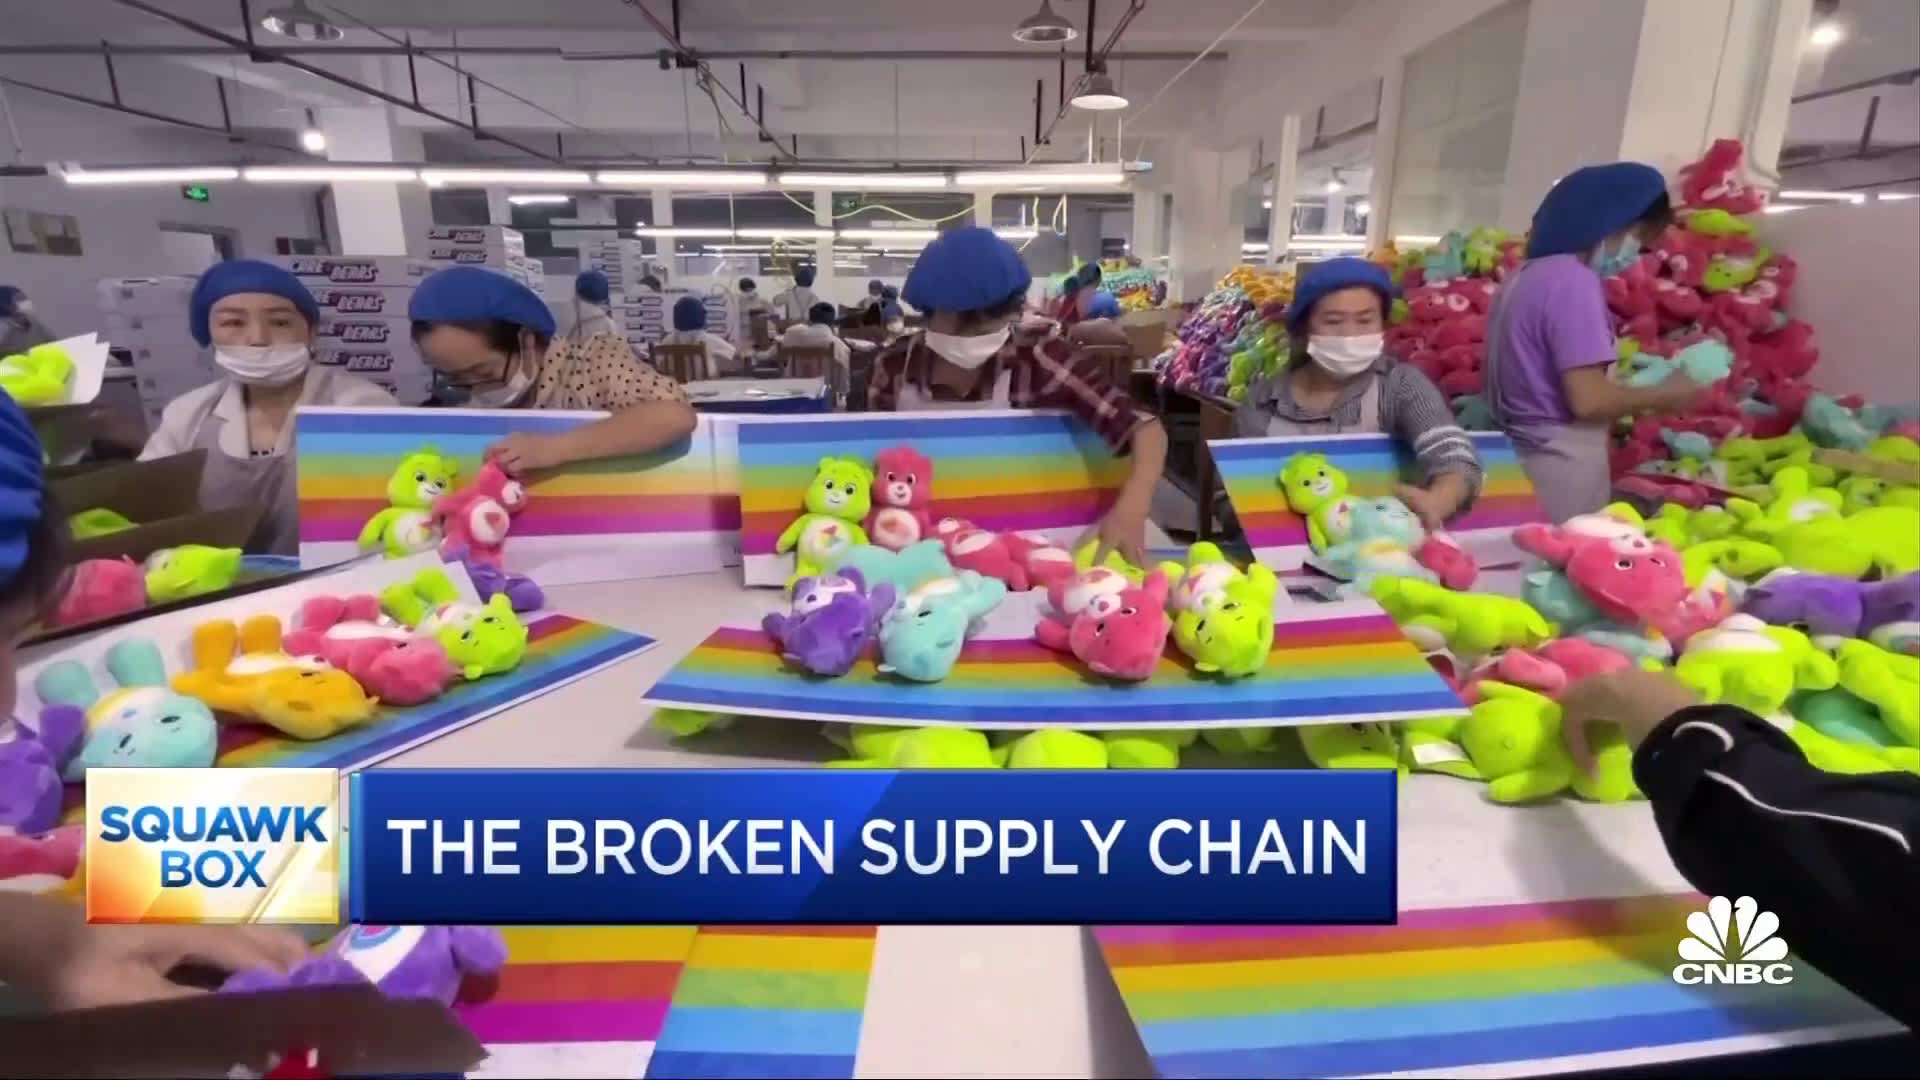 A look at the Care Bears' journey through the broken supply chain